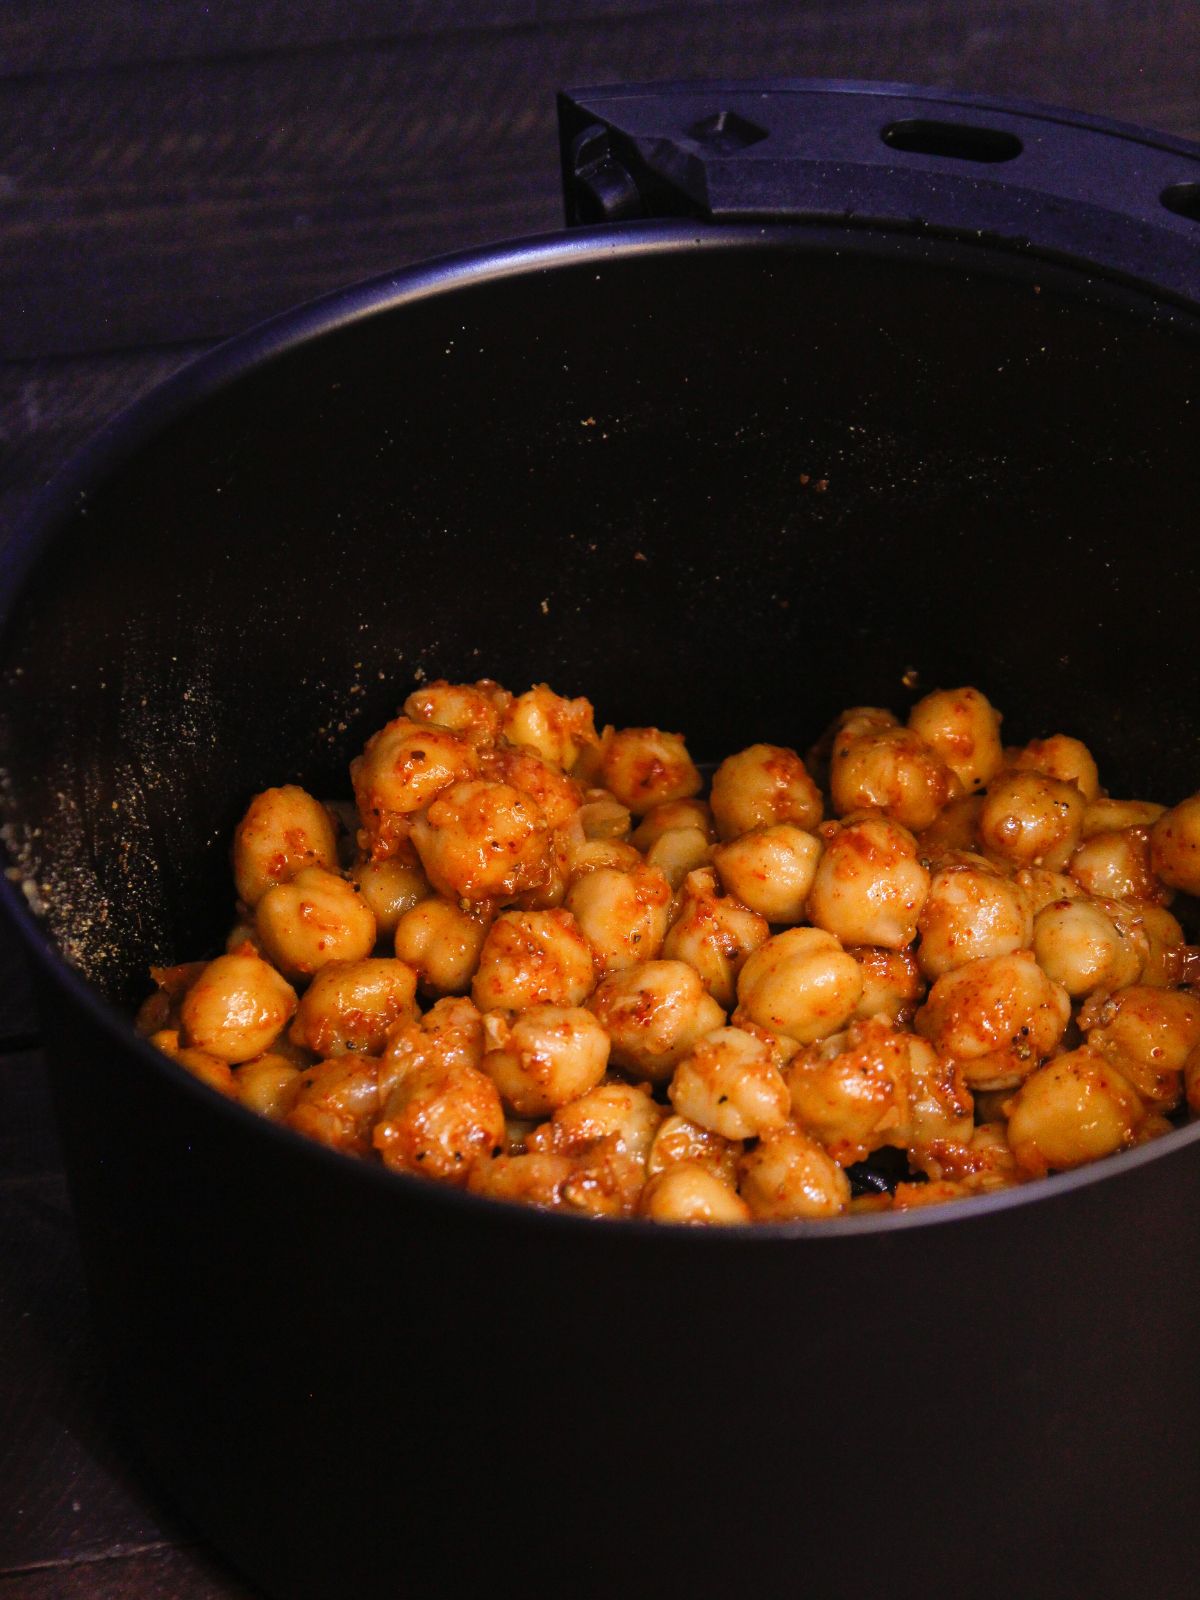 Transfer the chickpeas from the bowl to air fryer and cook well until its crunchy